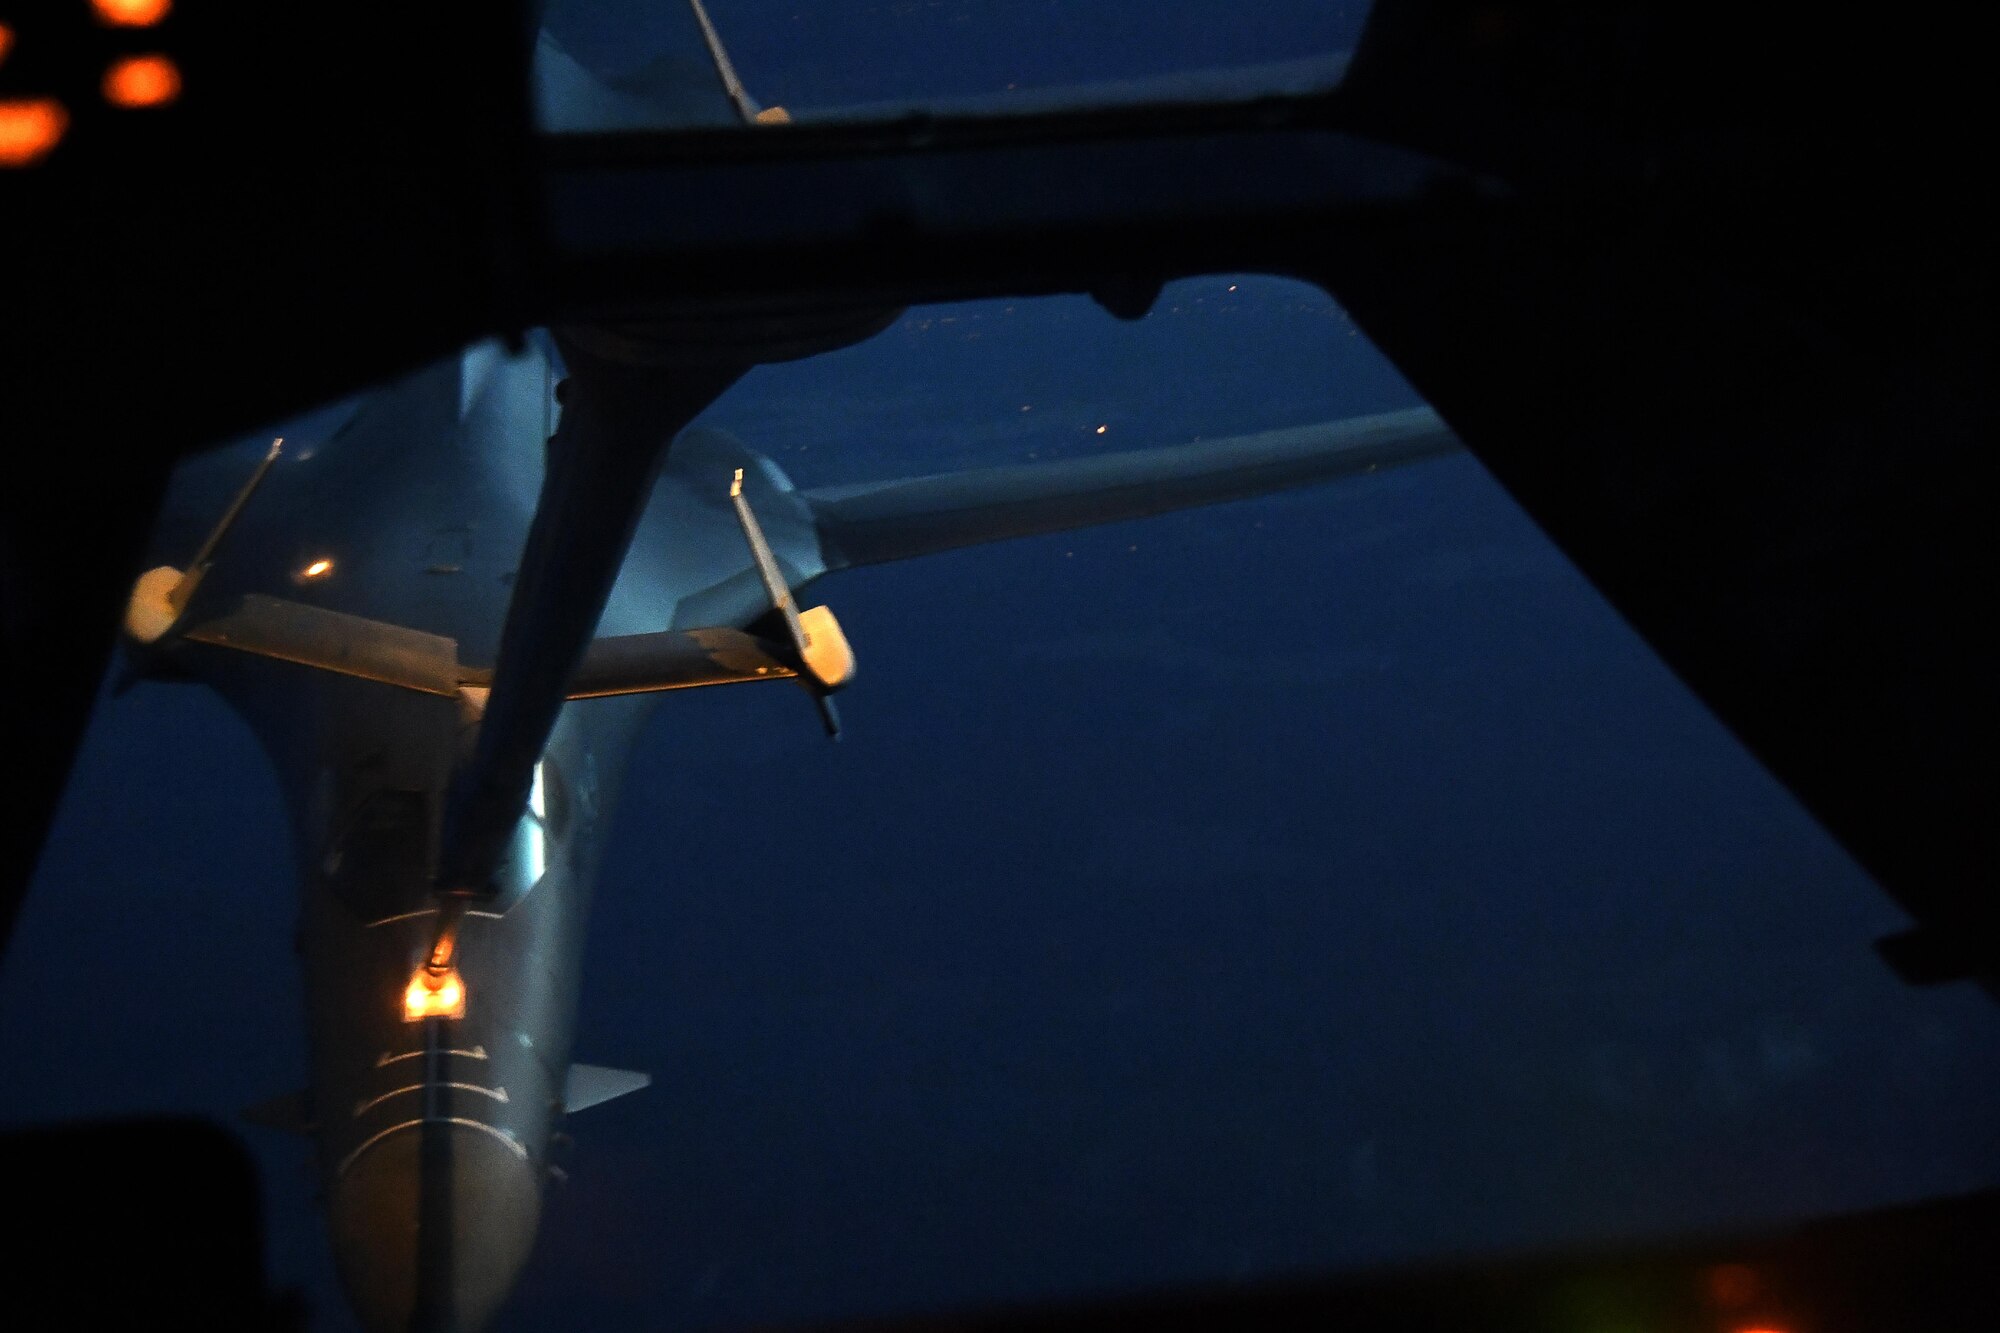 A B-1 Lancer from Ellsworth Air Force Base, South Dakota, receives fuel from a KC-10 over Newfoundland, May 18, 2017. The 9th Air Refueling Squadron from Travis AFB, California, staged at Joint Base McGuire-Dix-Lakehurst to support Exercise Eager Lion 17.